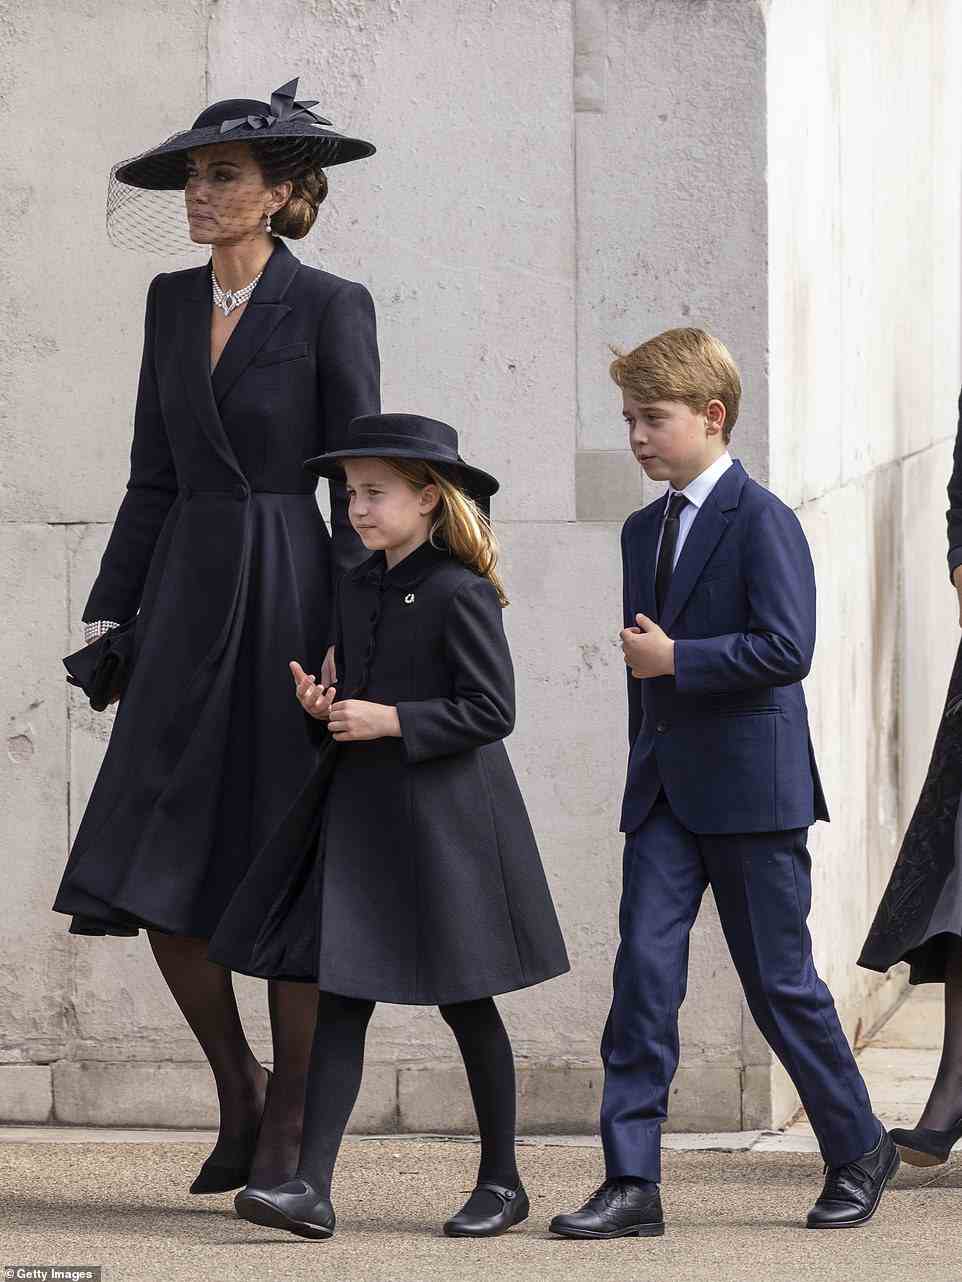 The Princess of Wales, Prince George and Princess Charlotte at Wellington Arch after the funeral at Westminster Abbey